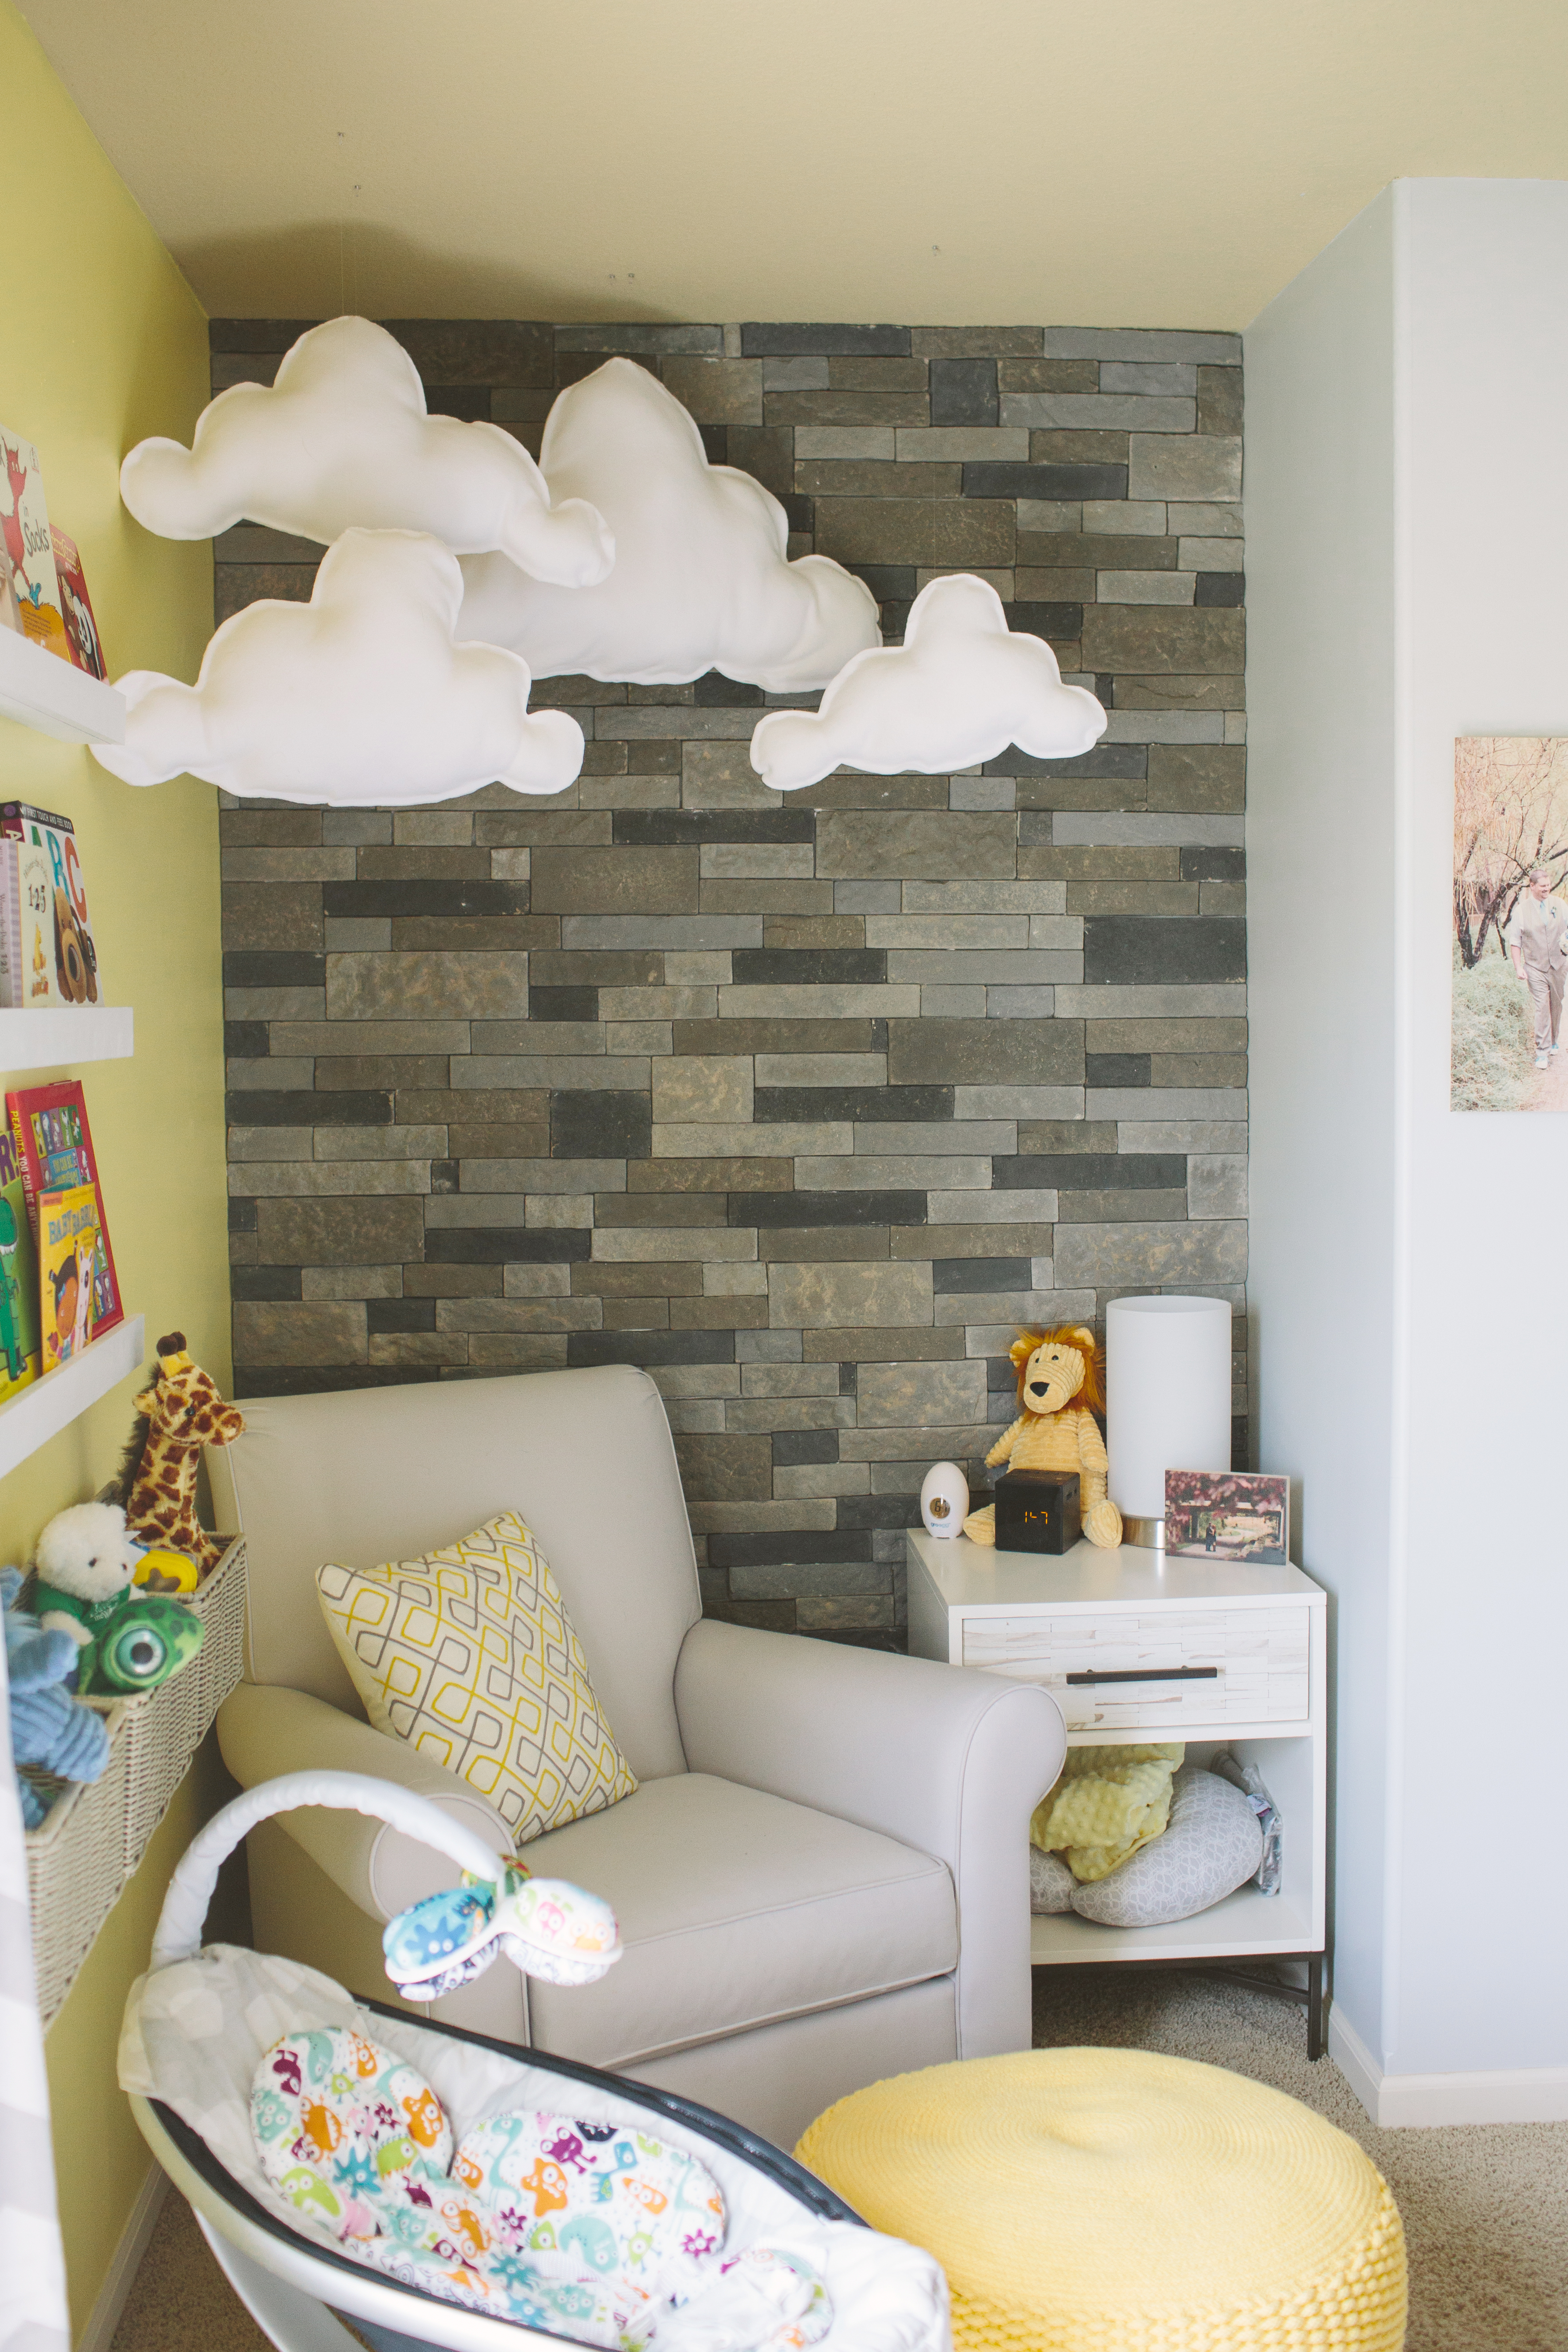 DIY Clouds and Stone Wall in this Cozy Nursery Nook